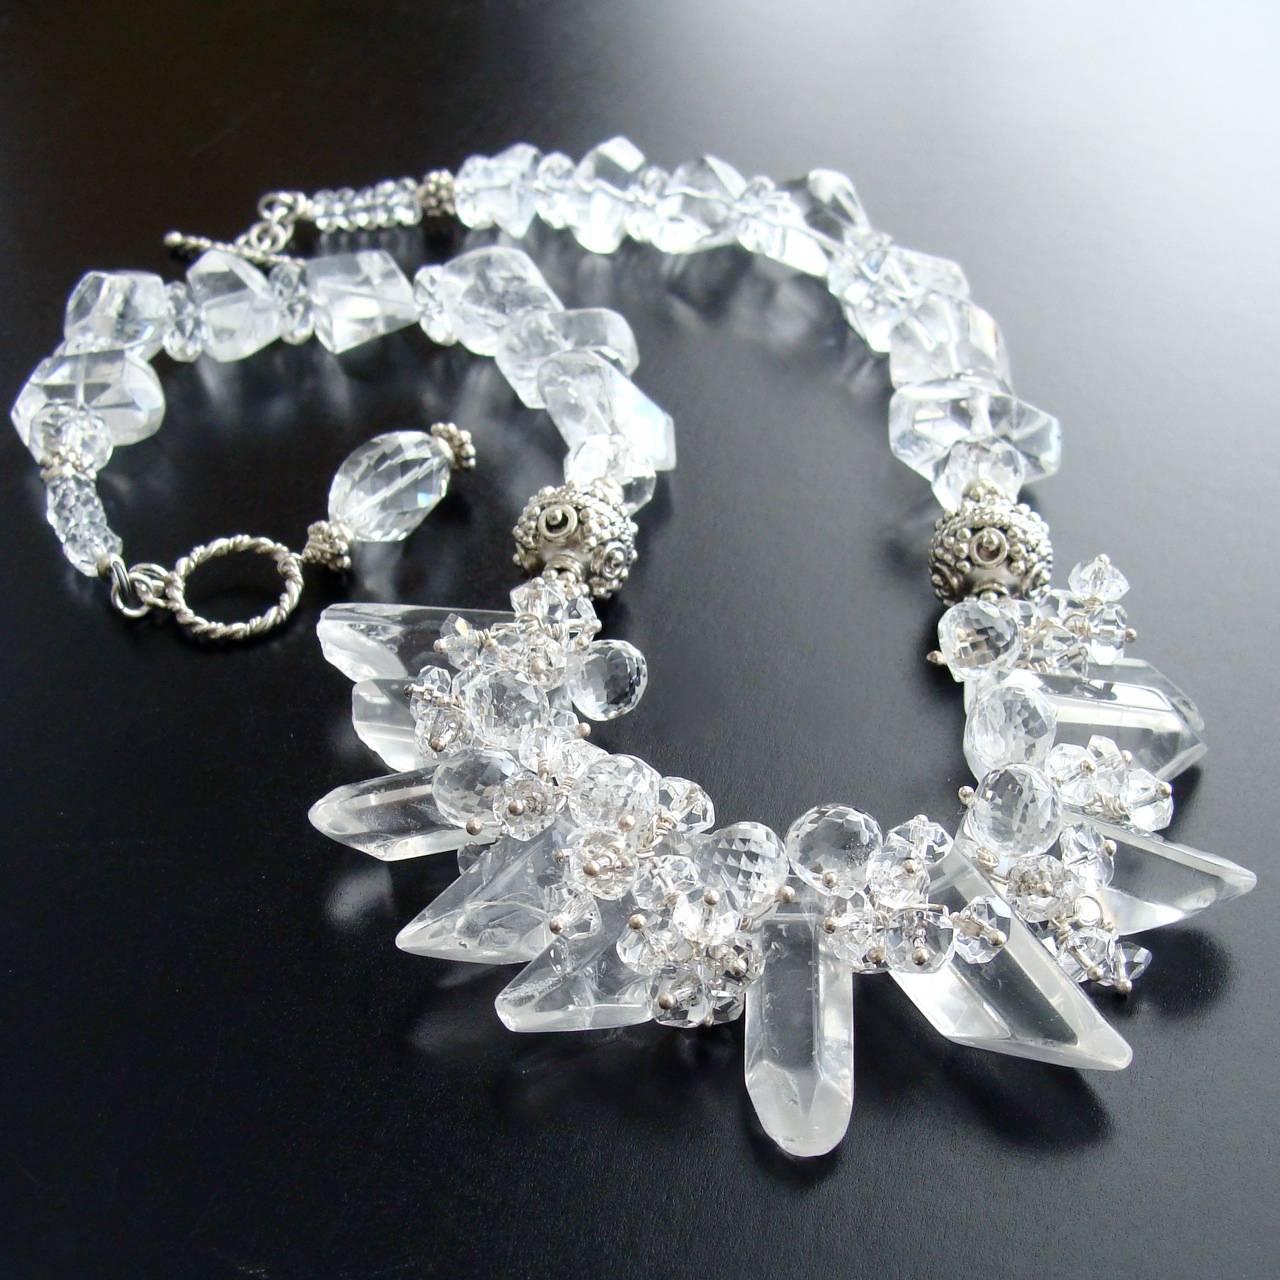 Krystal Necklace.

The icy beauty of this necklace - purely consisting of rock crystal nuggets and embellished with soft clusters of  rock crystal clusters nestled between ominous daggers - creates an oxymoron of the statement, “Minimalist Statement